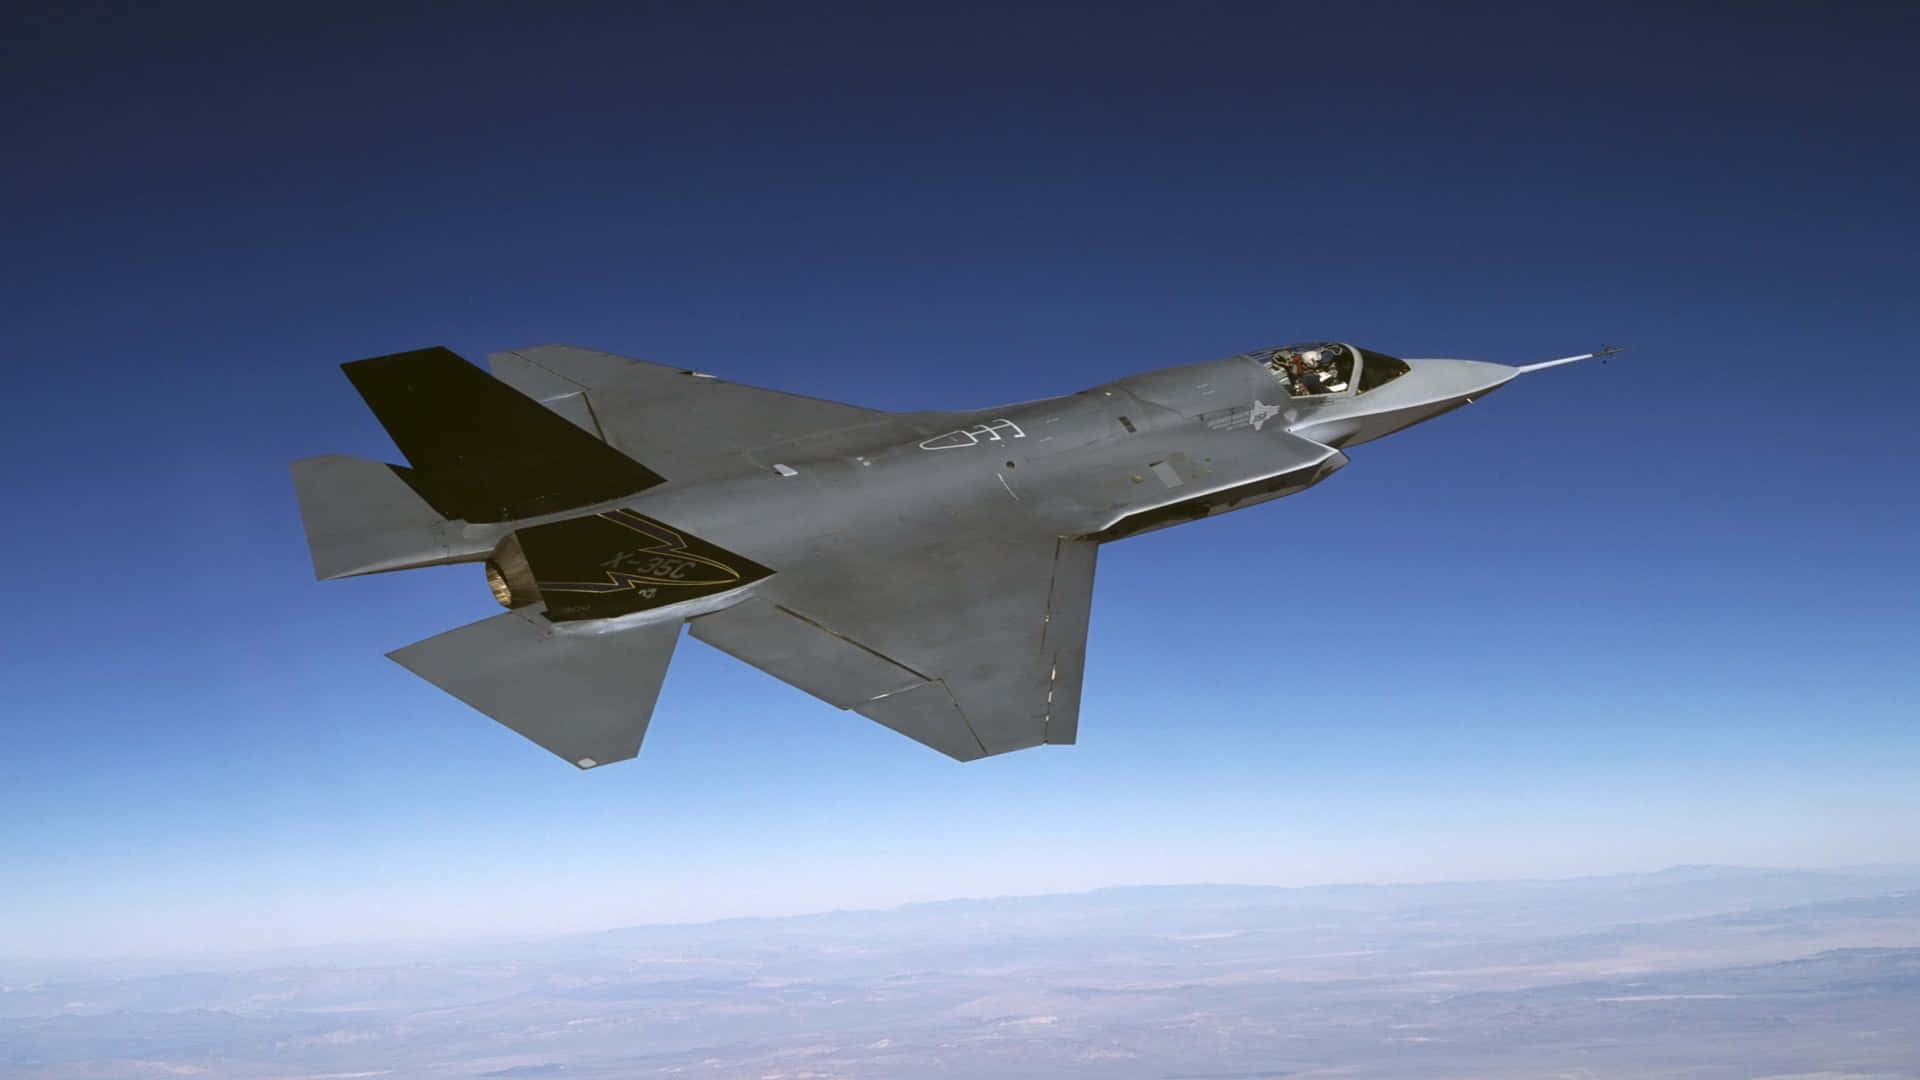 1080p Jumbo Jets F-35A Stealth Aircraft Background